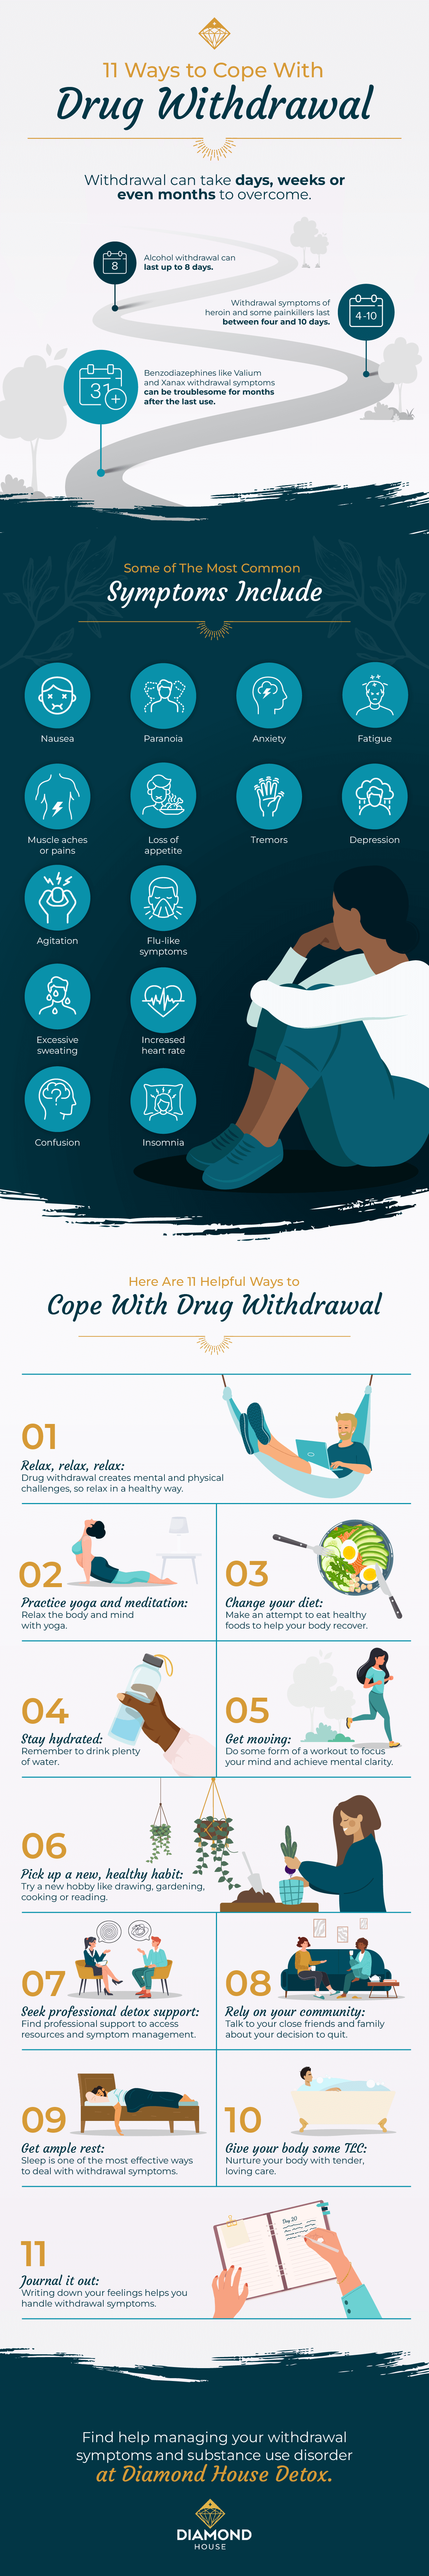 11 ways to cope with drug withdrawal